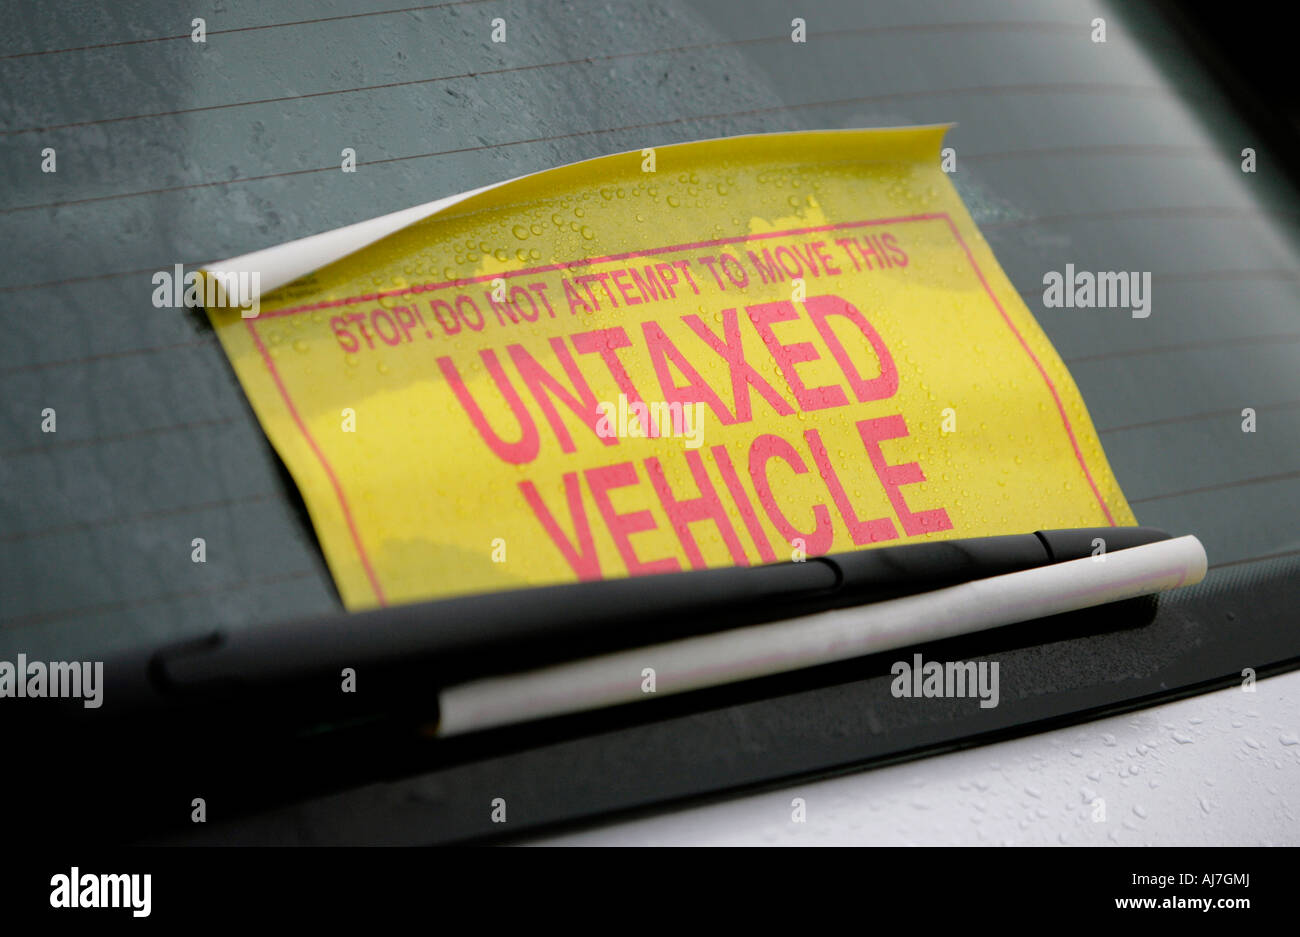 An untaxed vehicle notice is displayed on a vehicles windscreen. Stock Photo